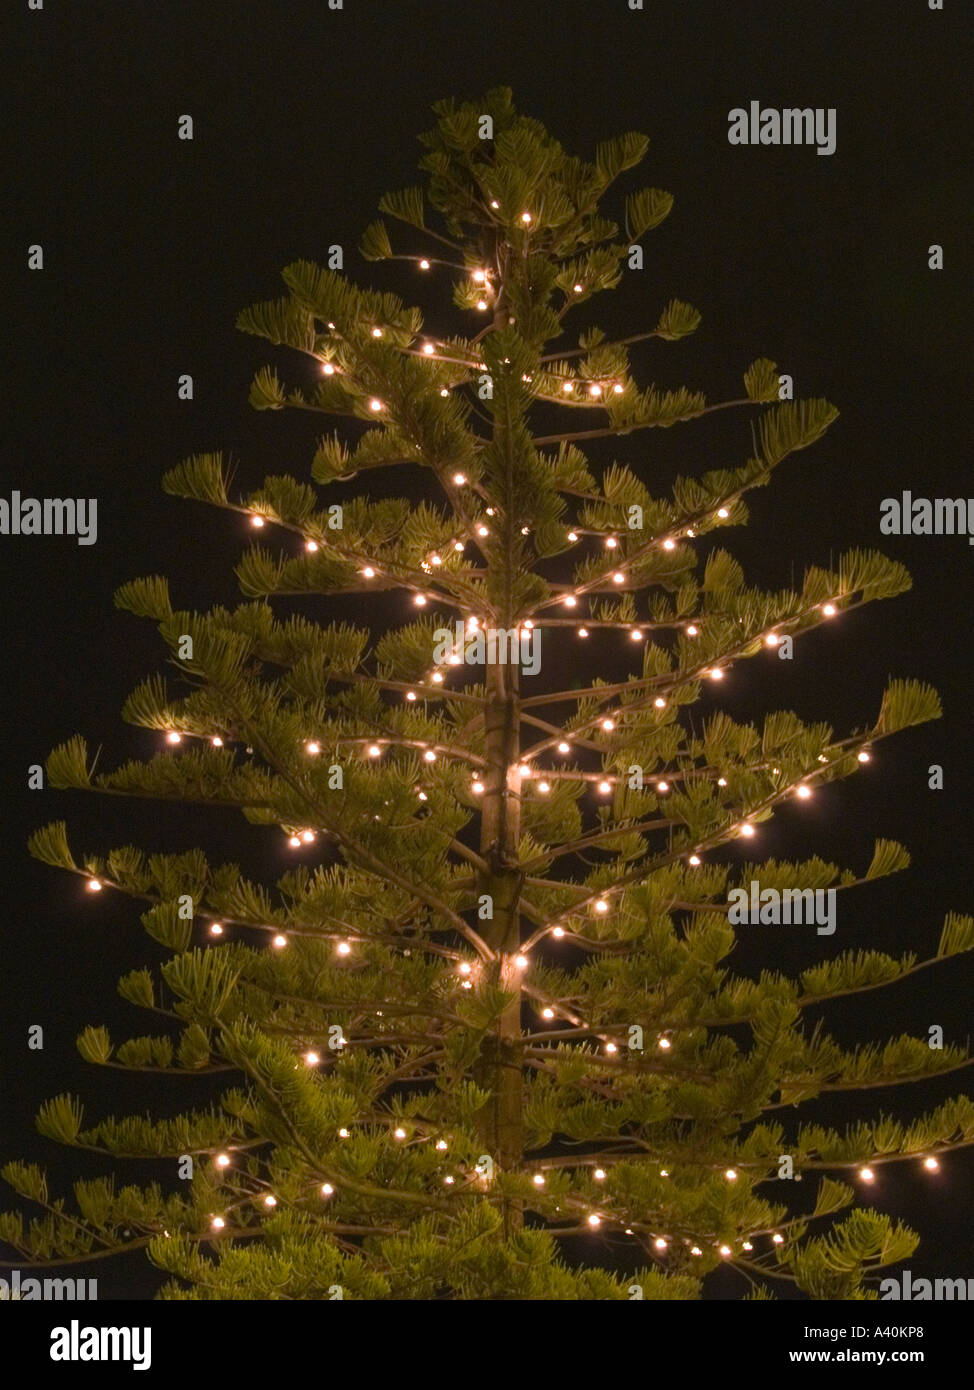 Norfolk Island Pine tree conifer lit up with tree lights at night Stock Photo